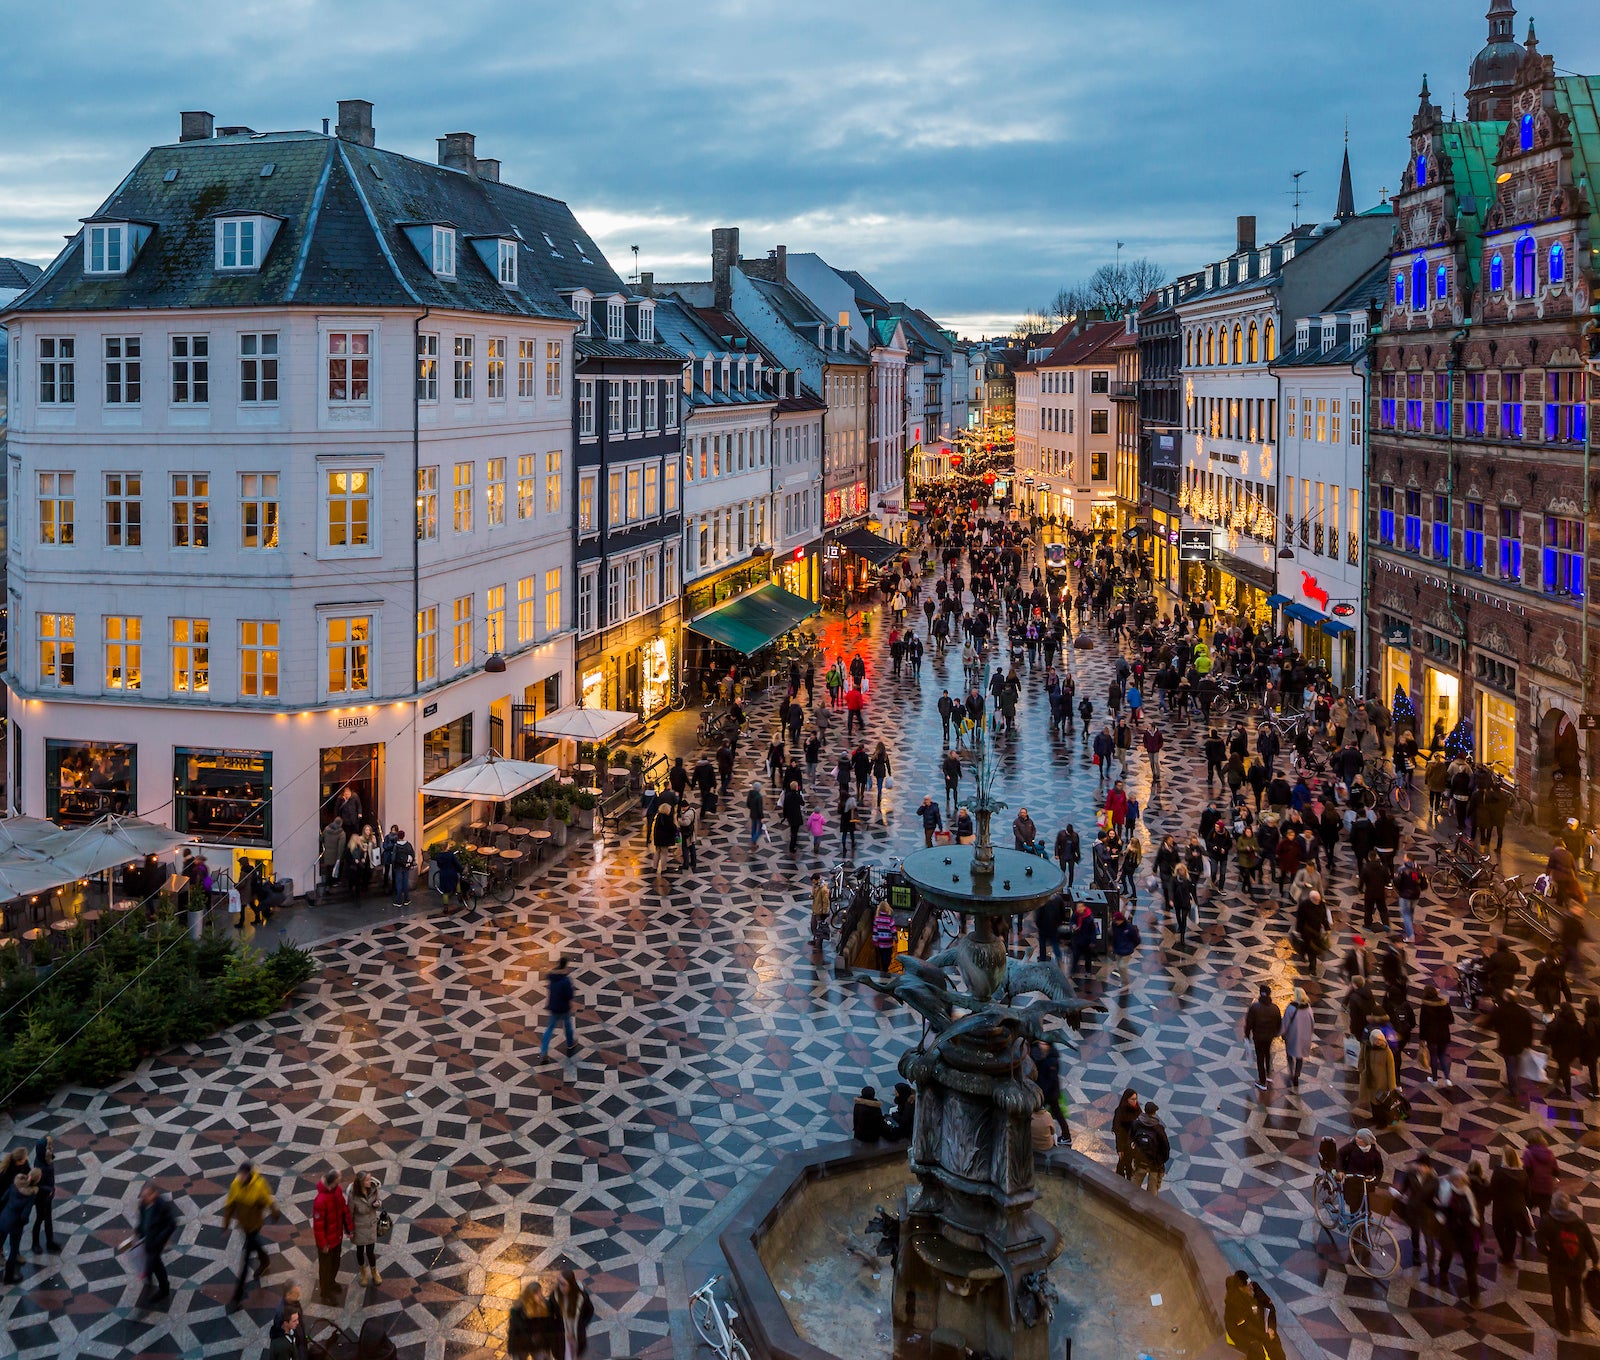 Amagertorv (Amager Square), the Stork Fountain and Str√∏get street, the main shopping street in Copenhagen